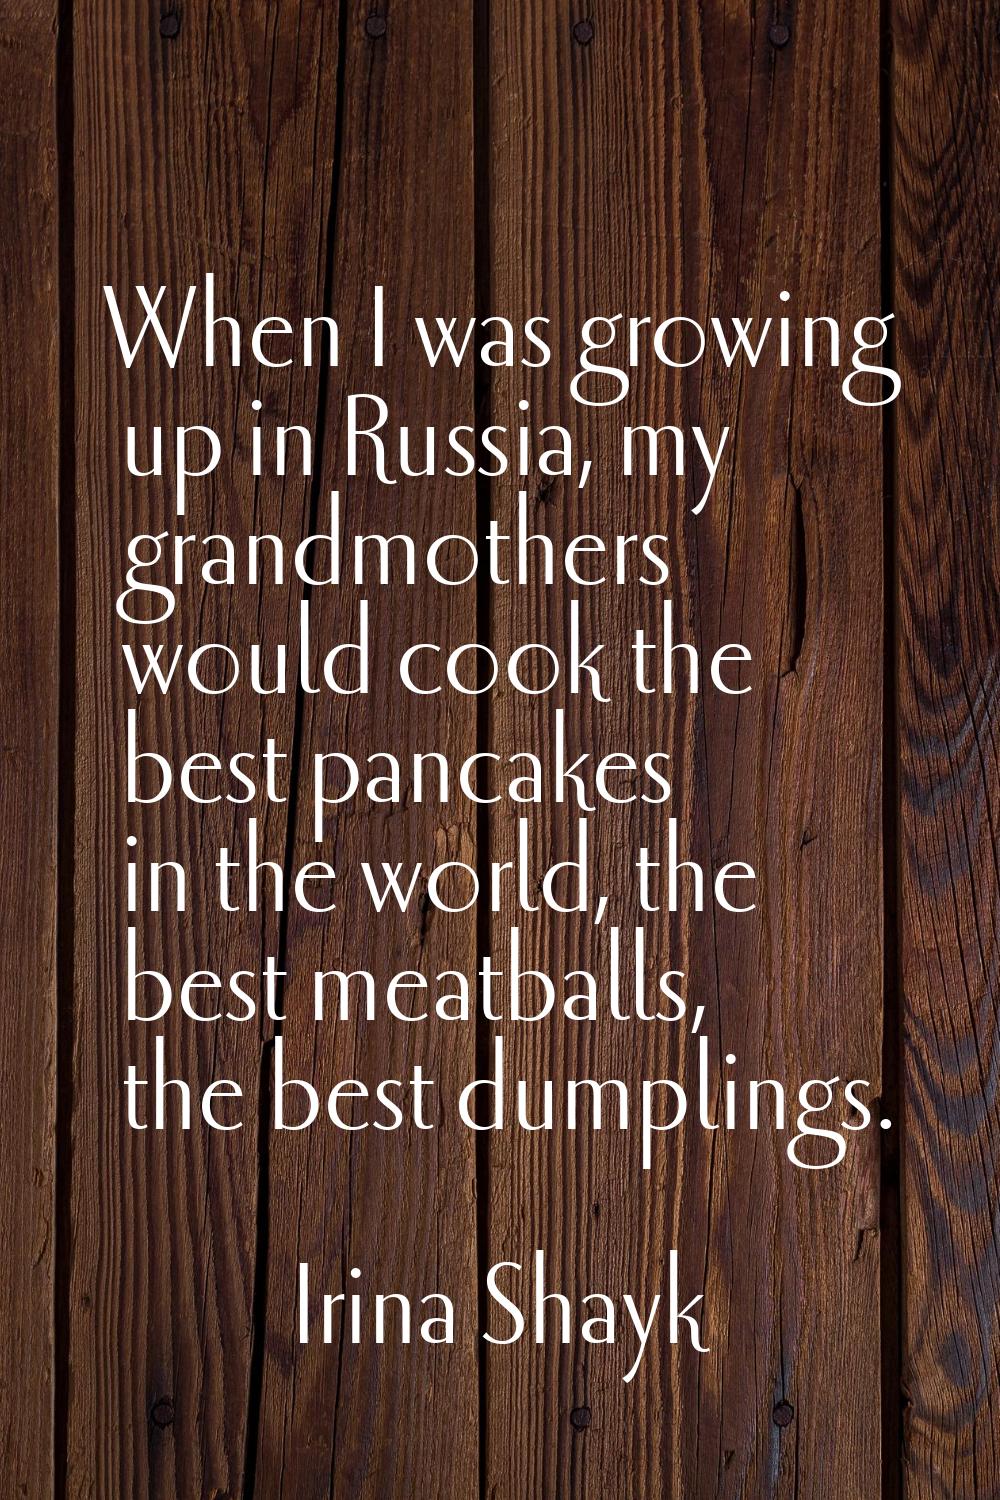 When I was growing up in Russia, my grandmothers would cook the best pancakes in the world, the bes